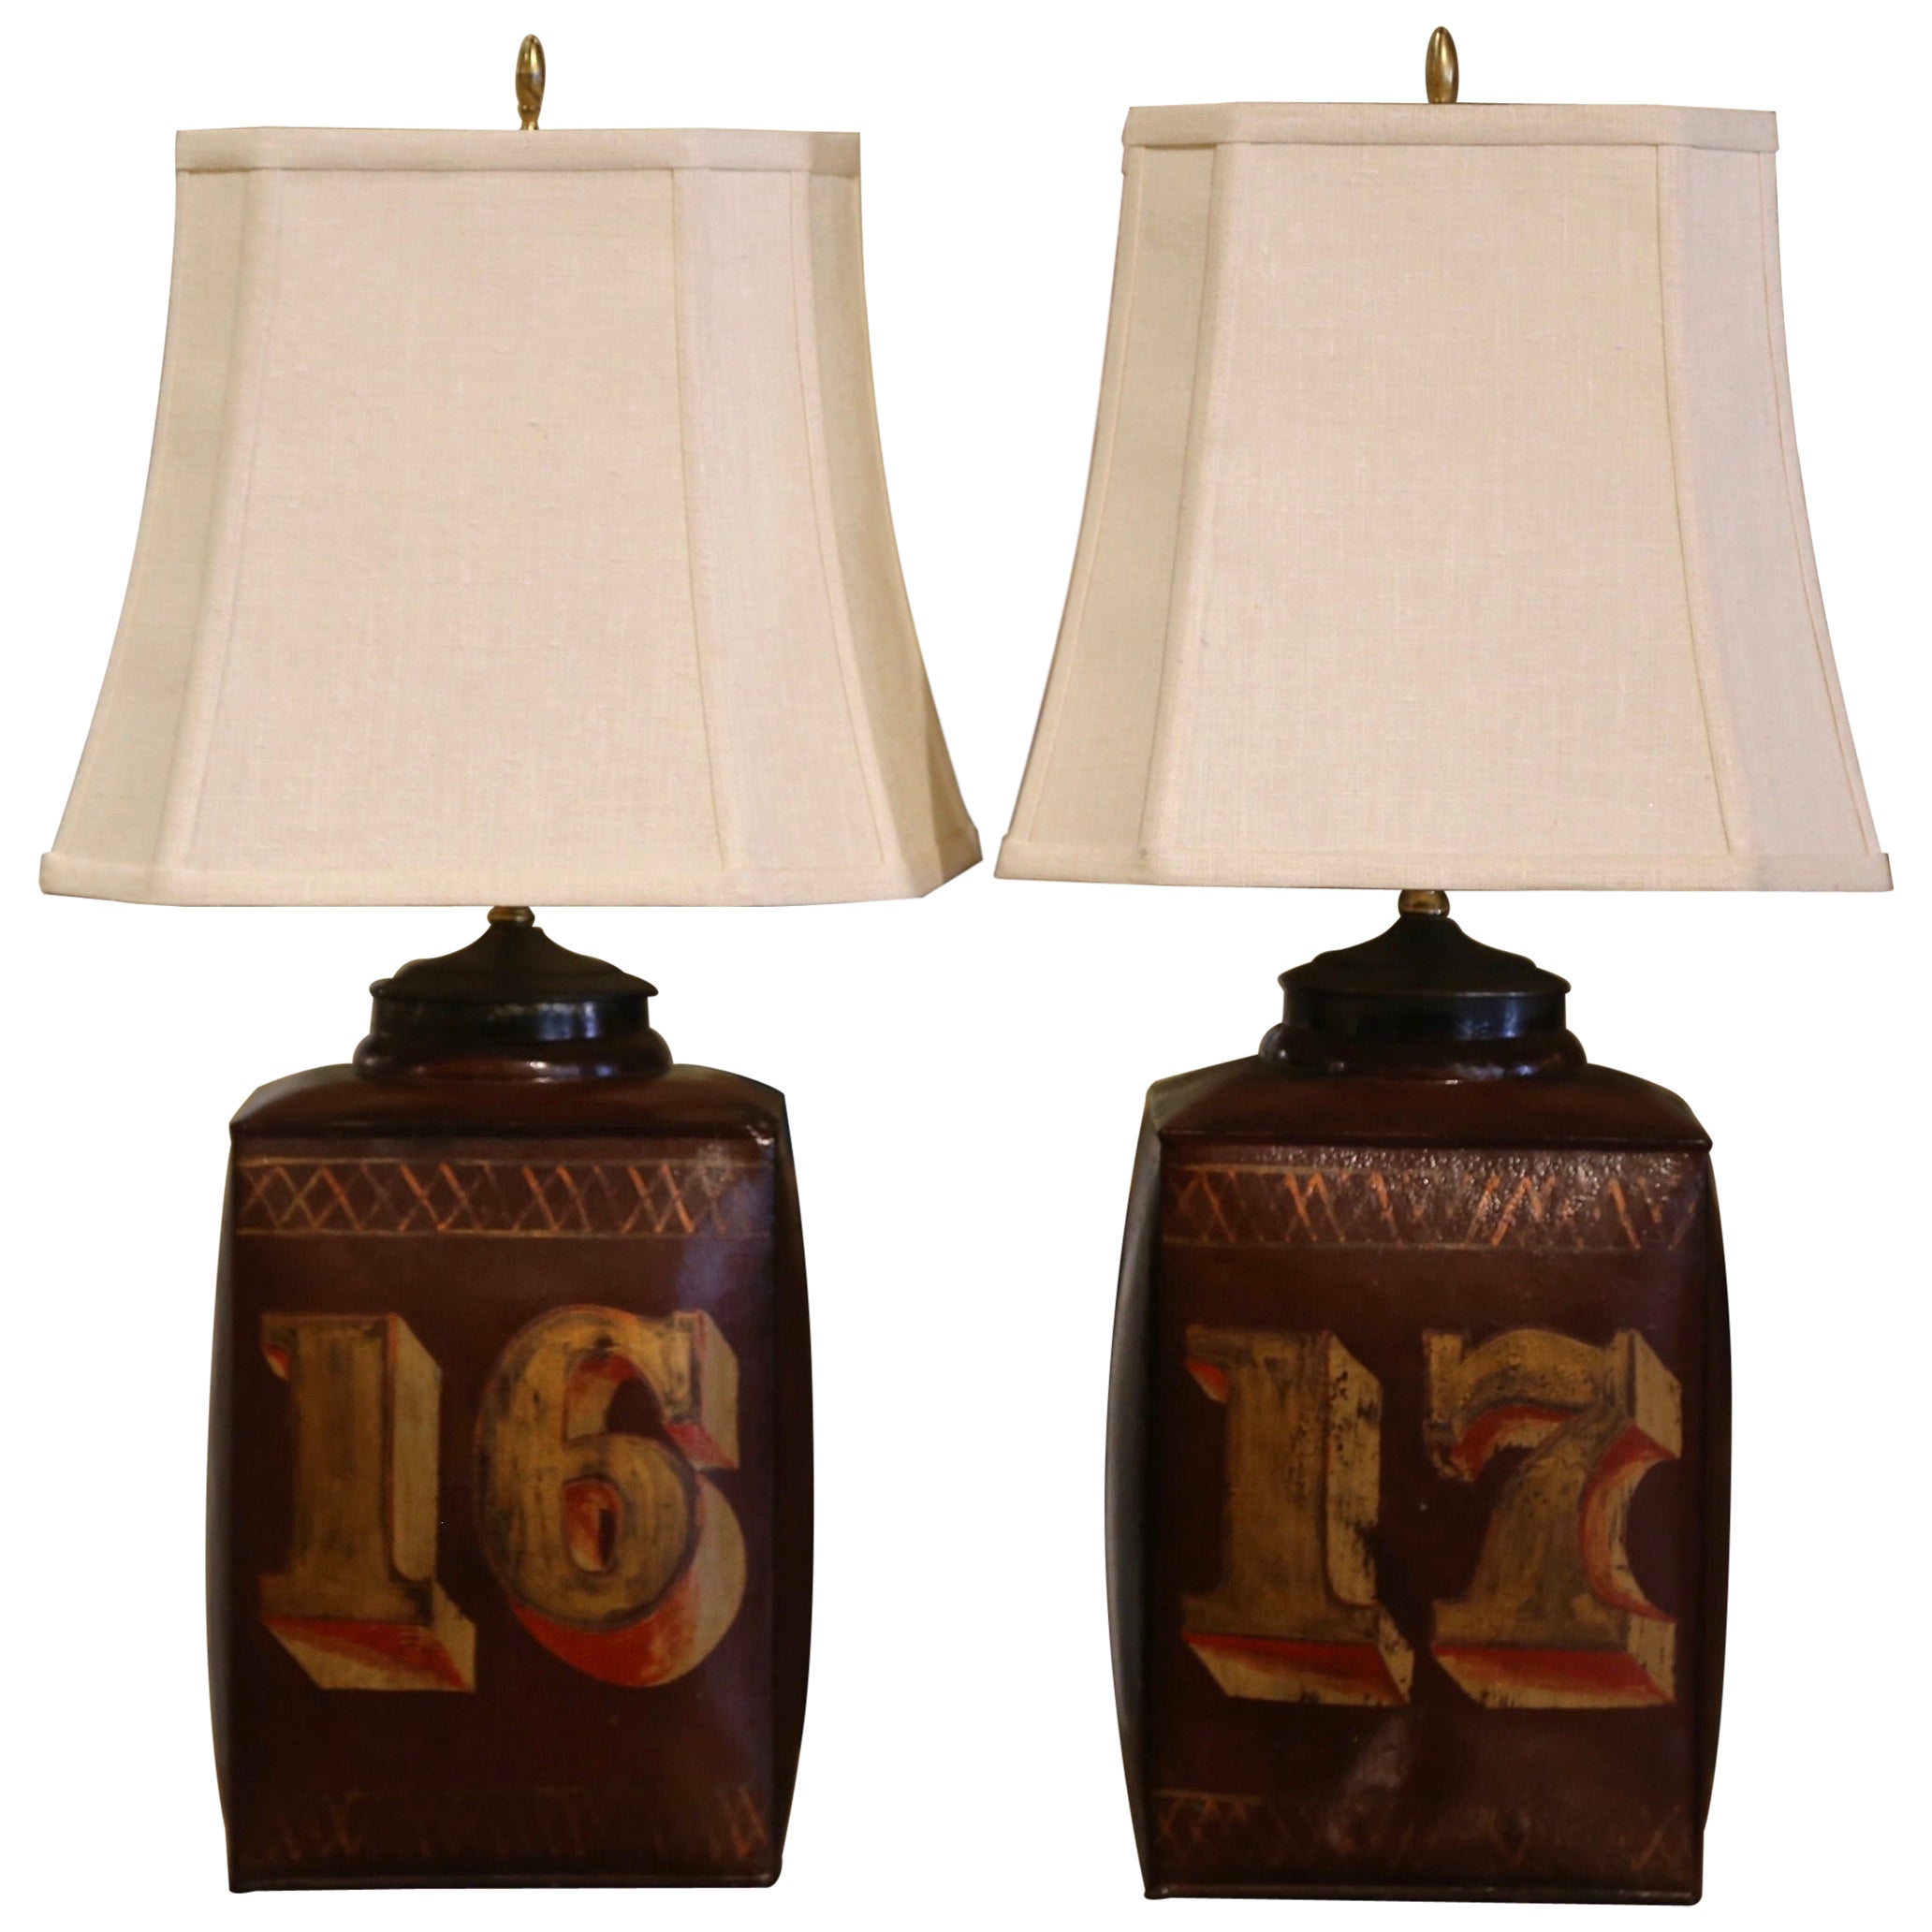 Pair of 19th Century English Painted Tole Tea Canister Table Lamps with Shades